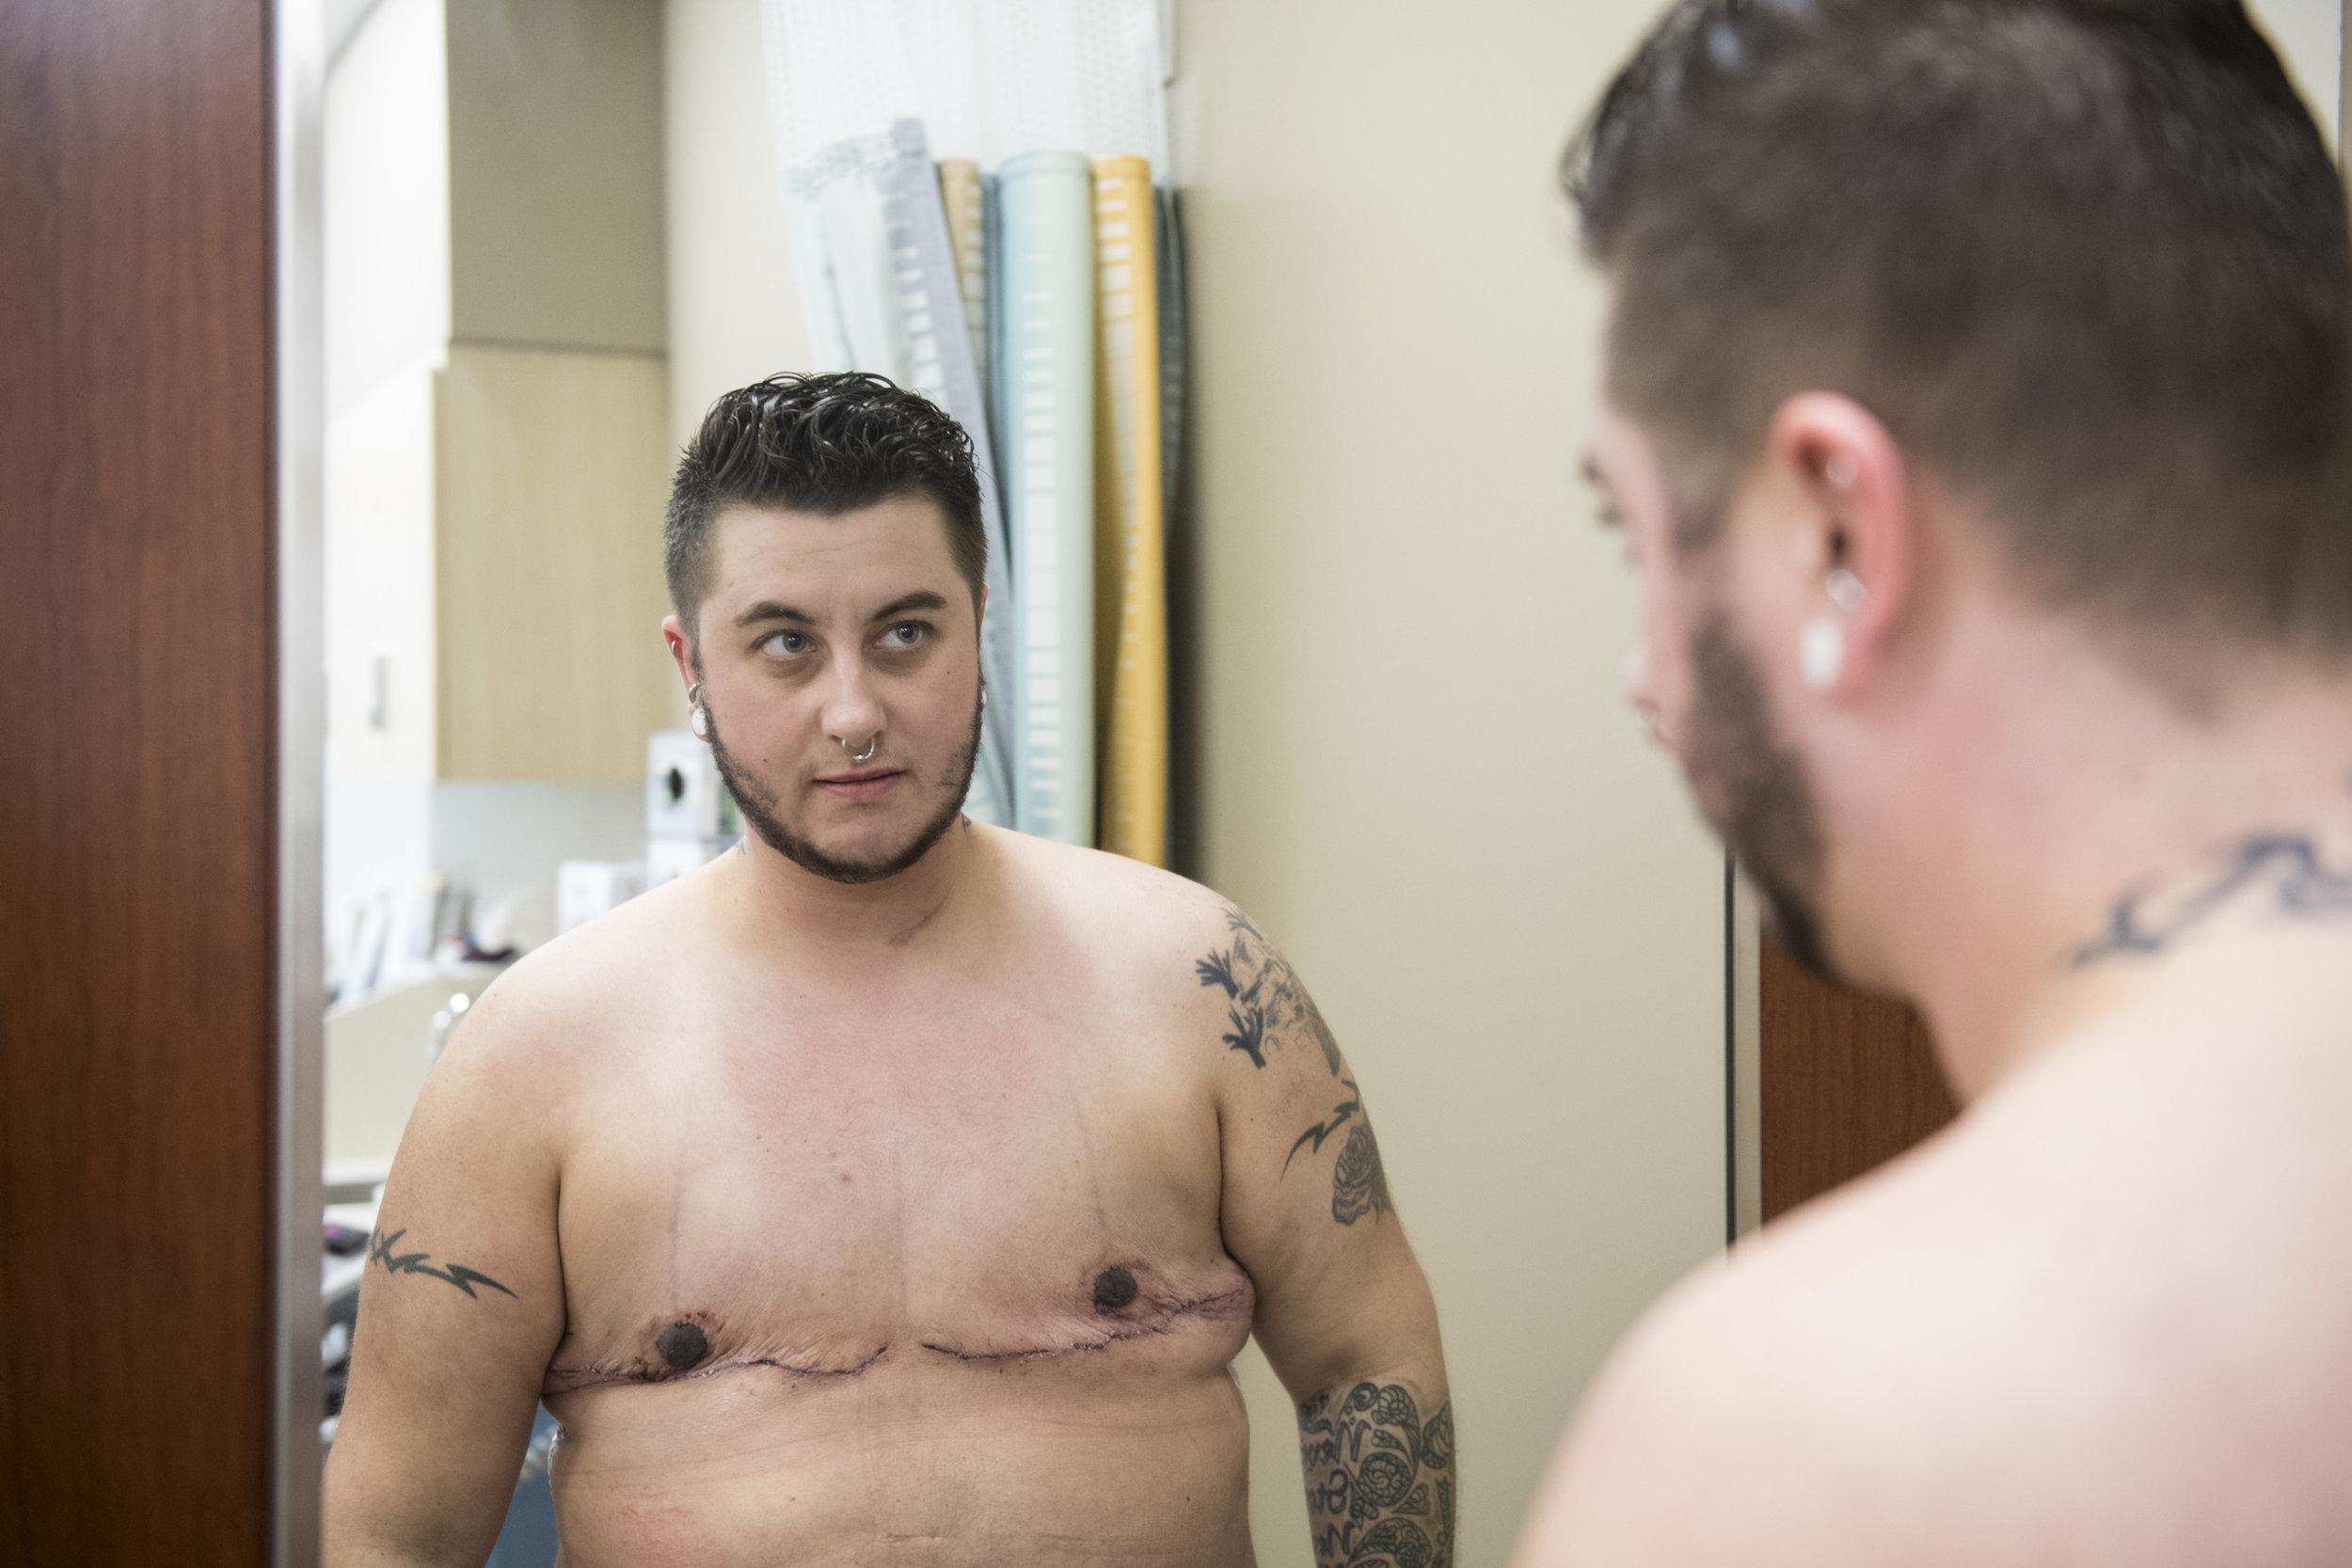  Beau looks at himself for the first time without breasts. “For the first time in my life, I can exhale—not just breathe to live, but to really let it out, because my autonomy in many ways is complete. I’m not just breathing and existing in a body I 